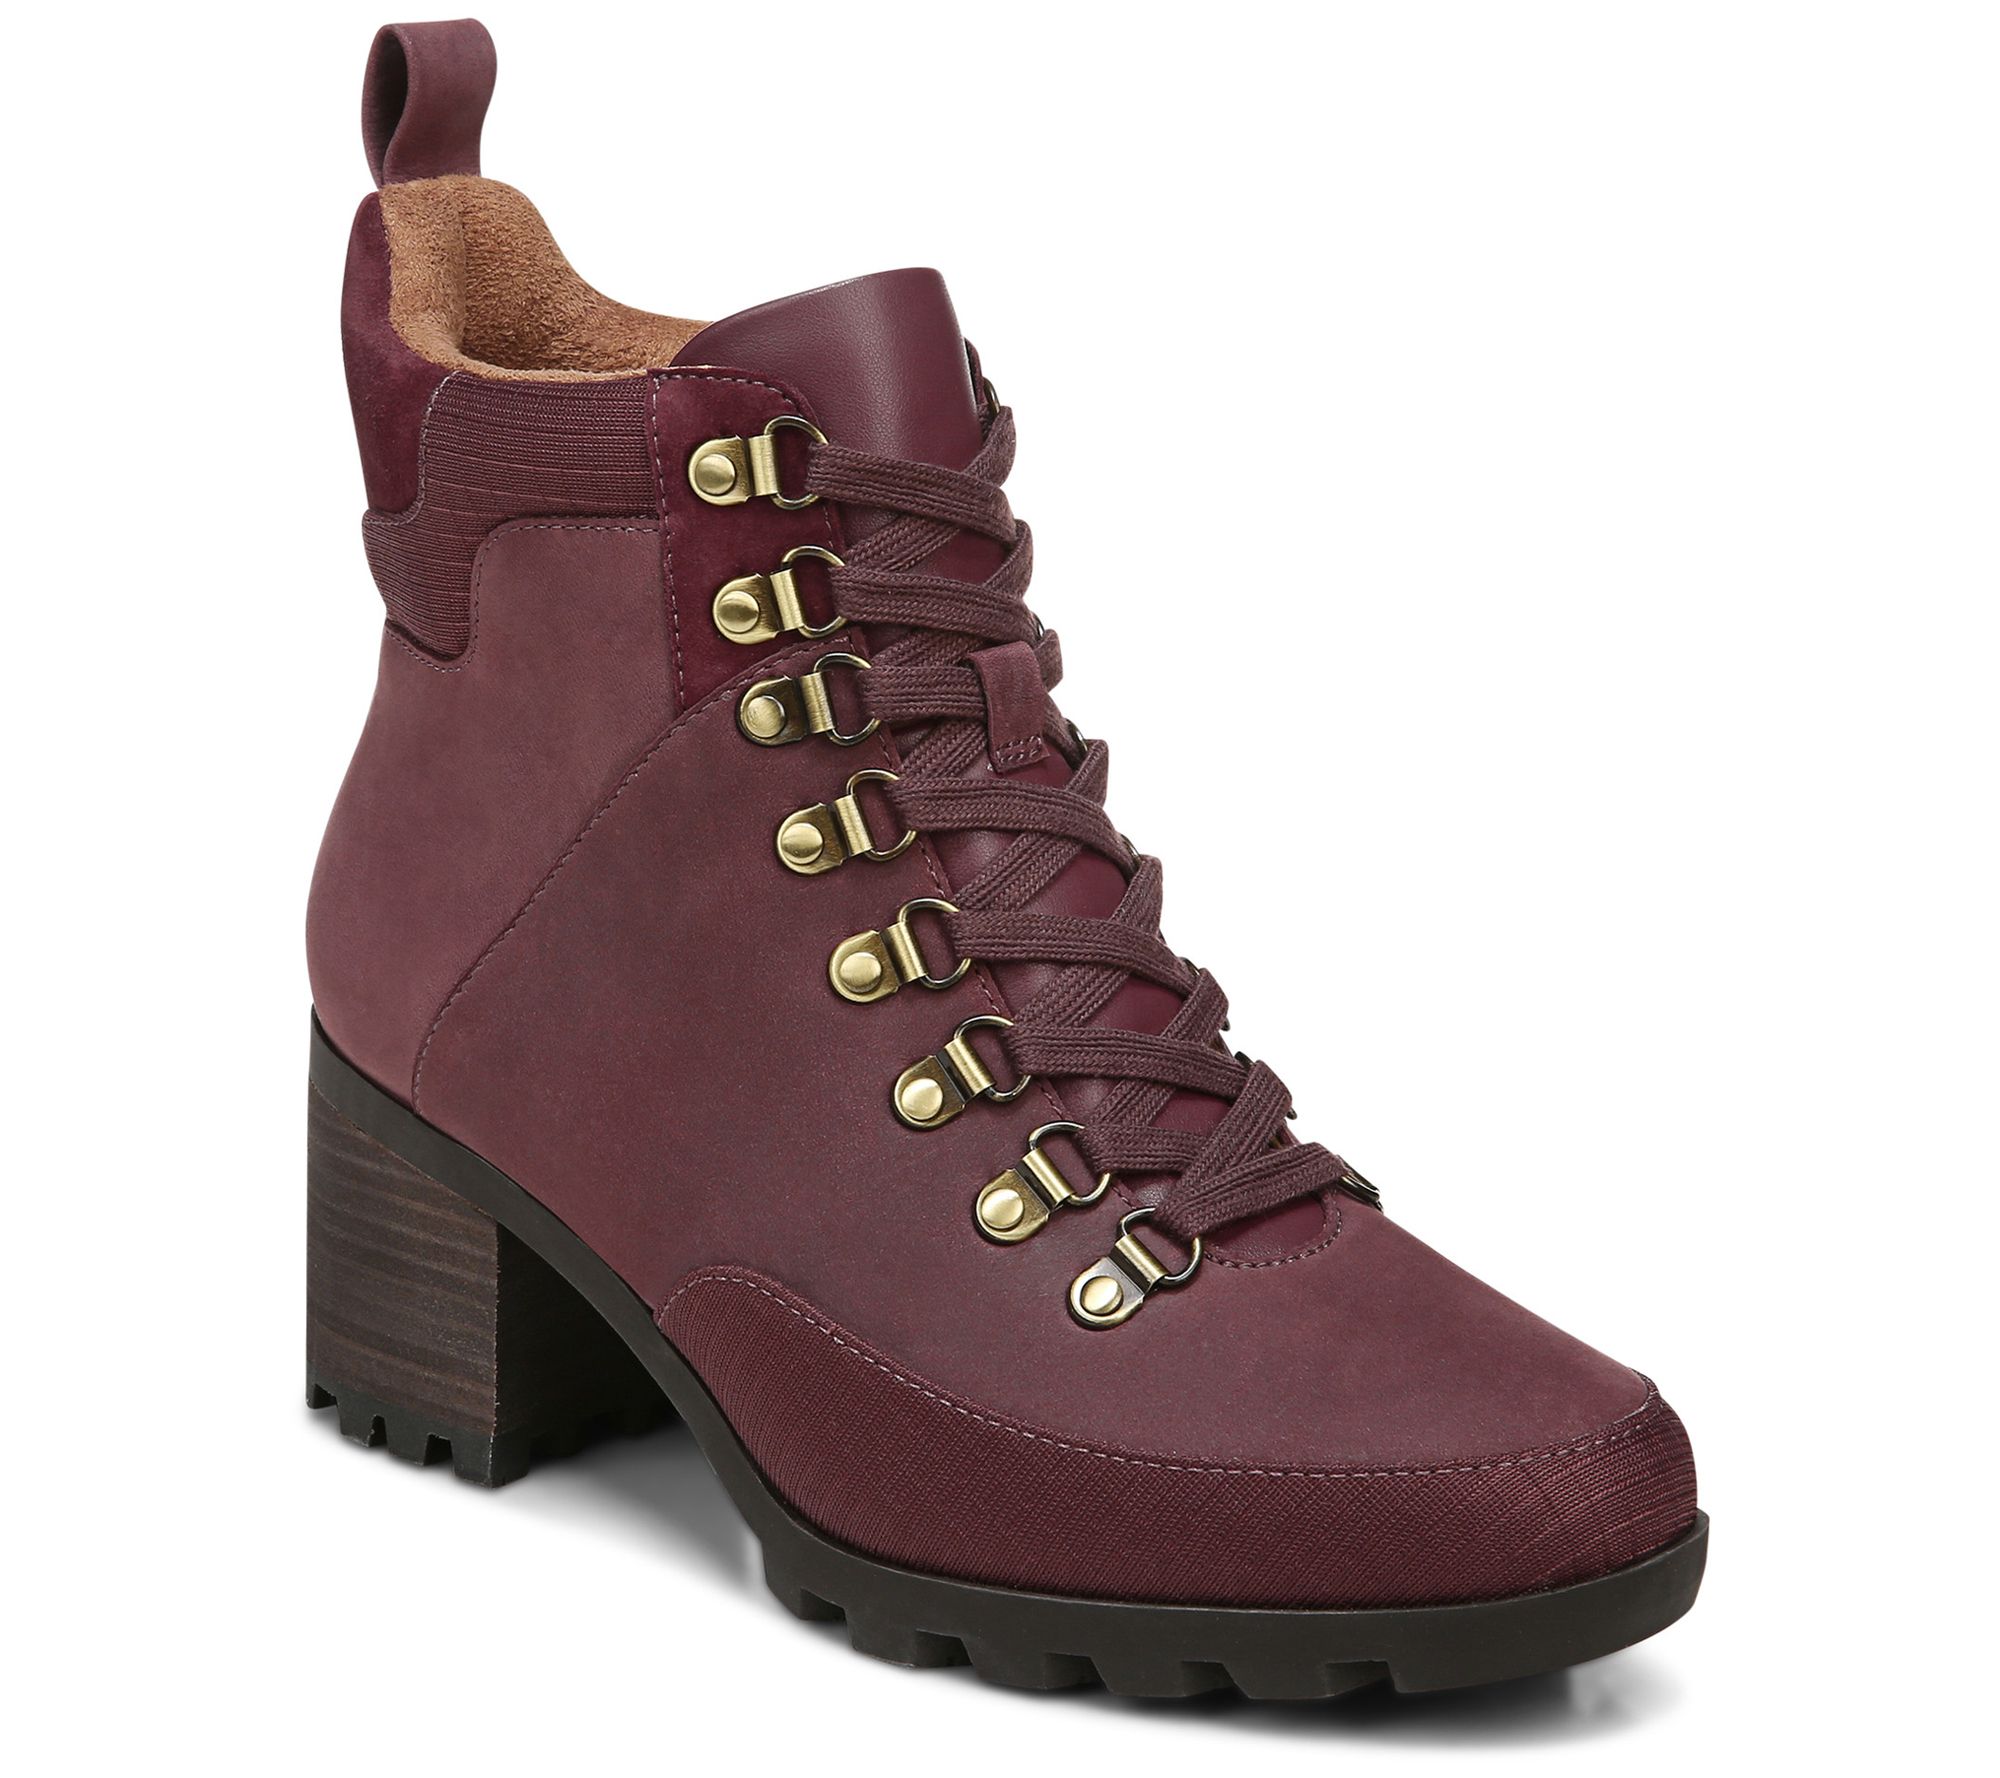 Vionic Leather Lace-Up Heeled Boots - Spencer - QVC.com